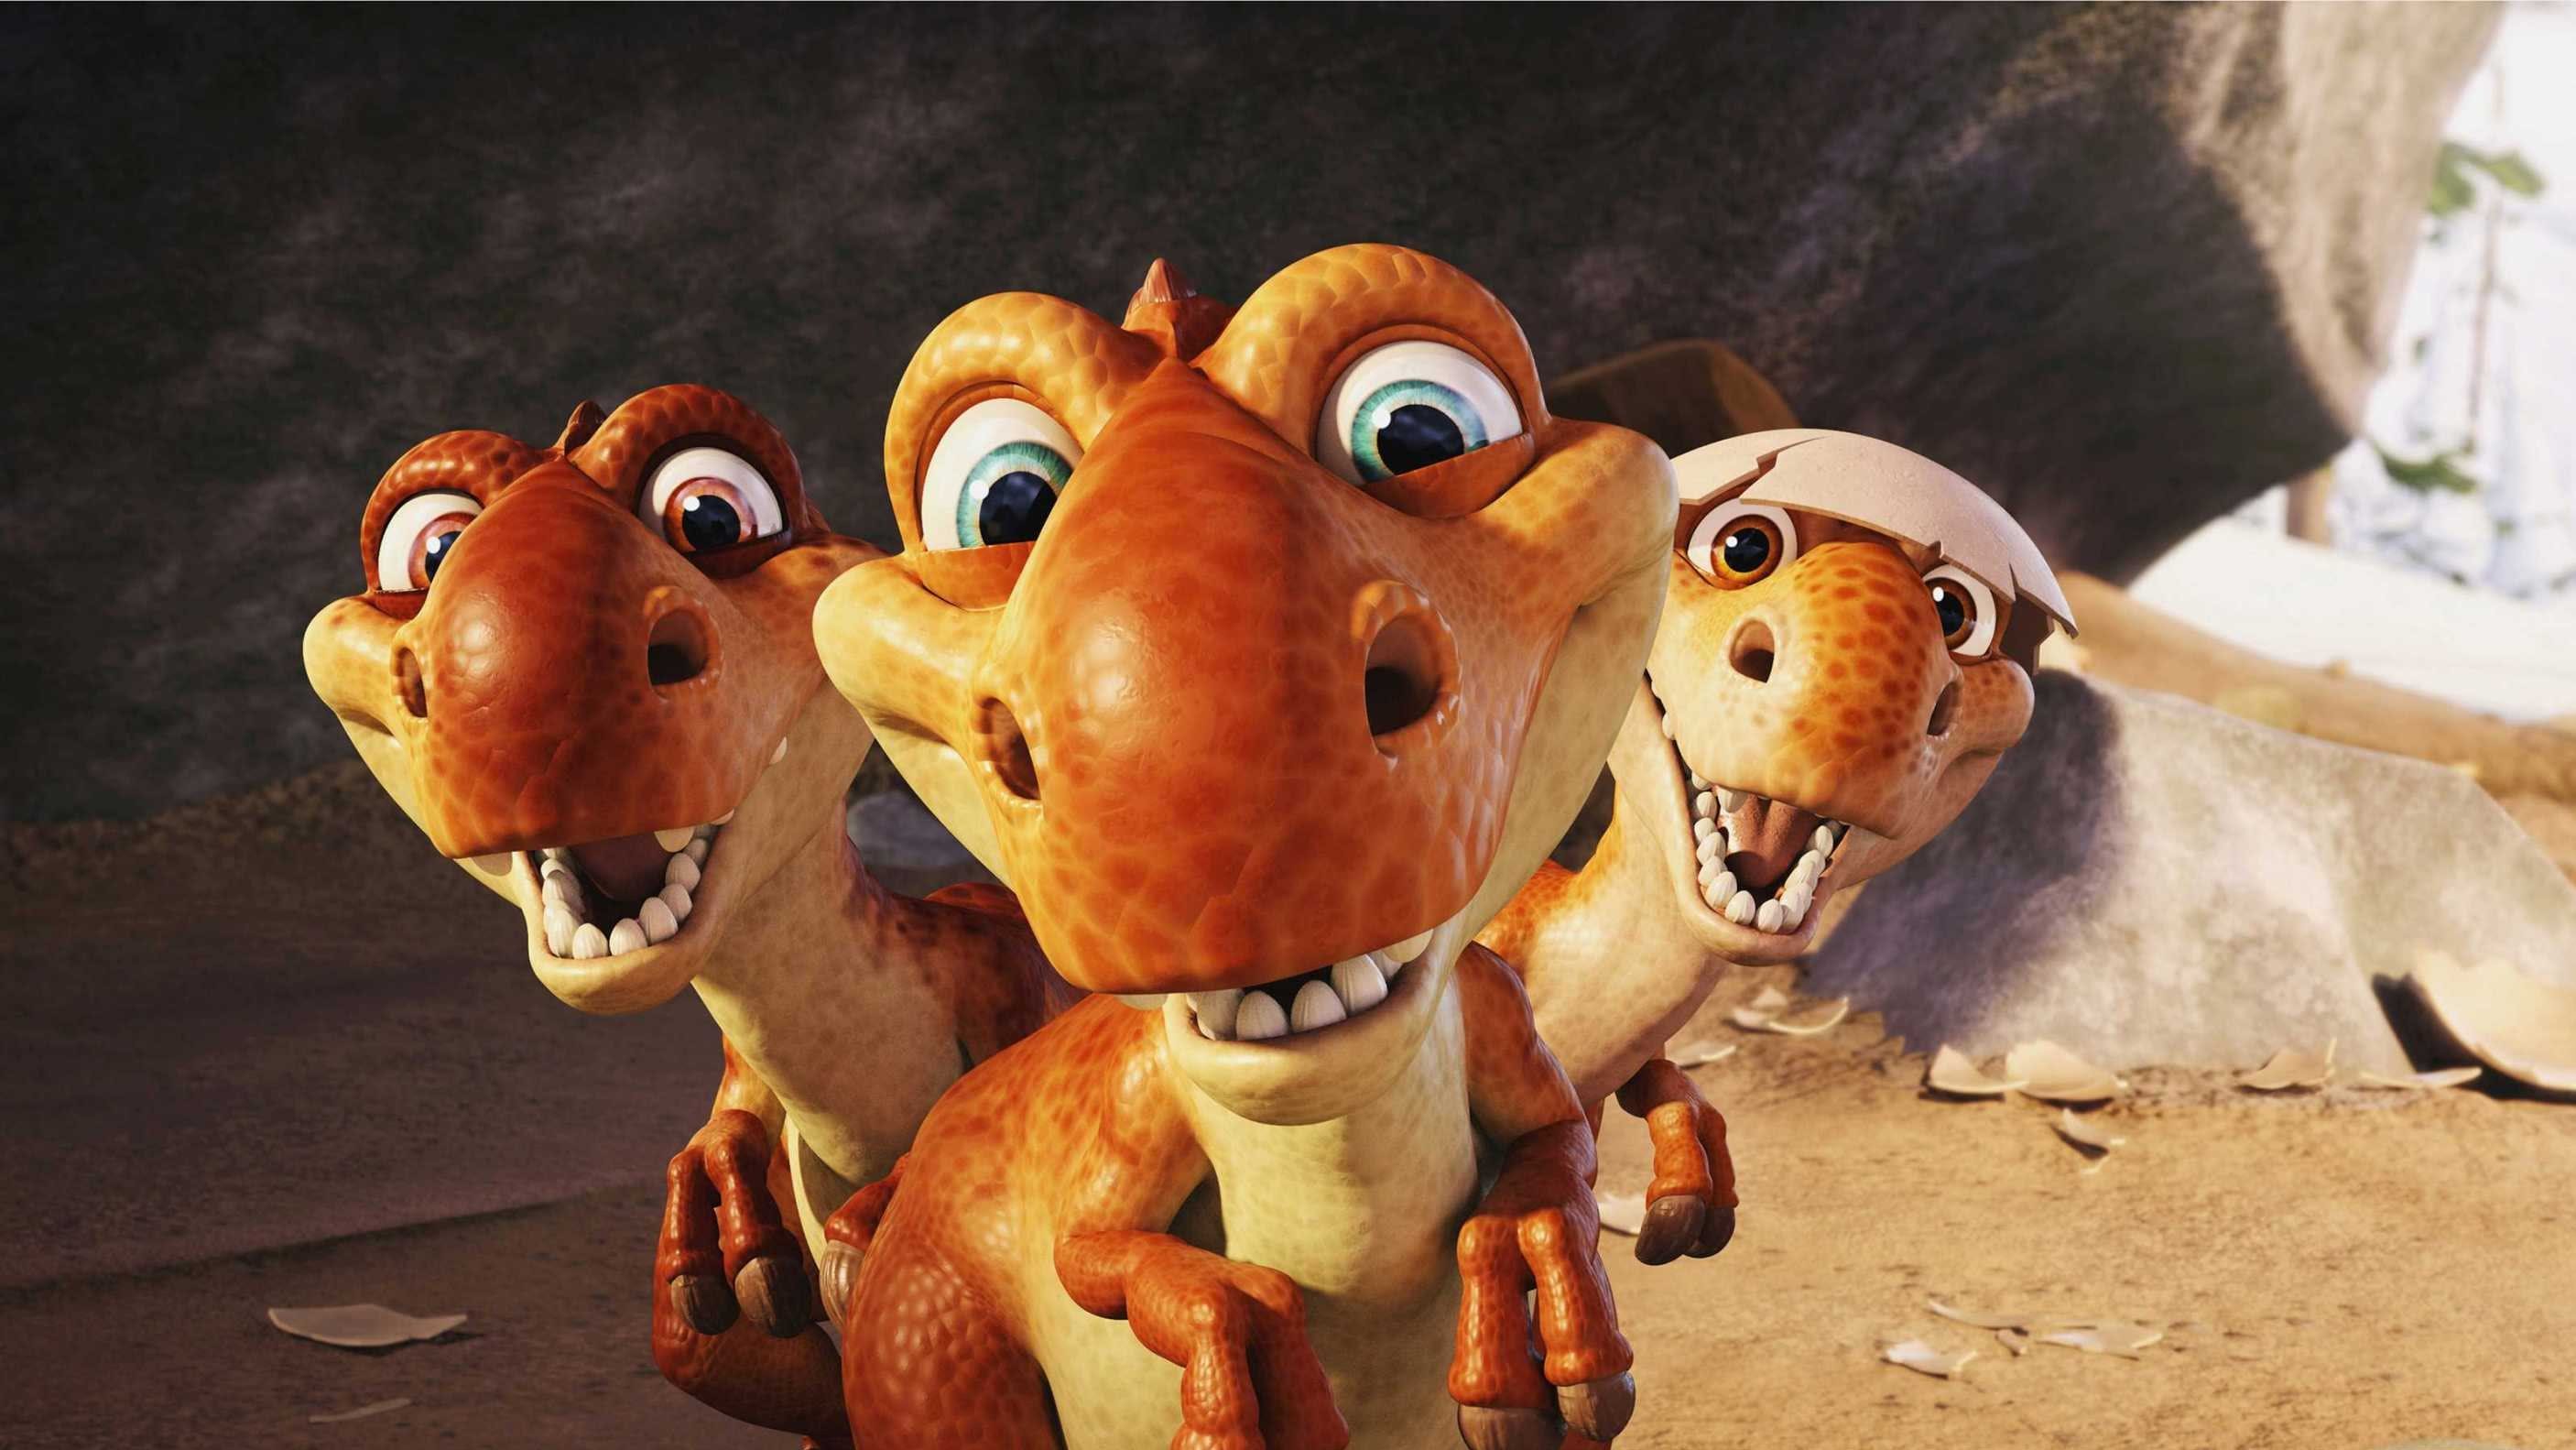 Movie Ice Age: Dawn of the Dinosaurs HD Wallpaper | Background Image